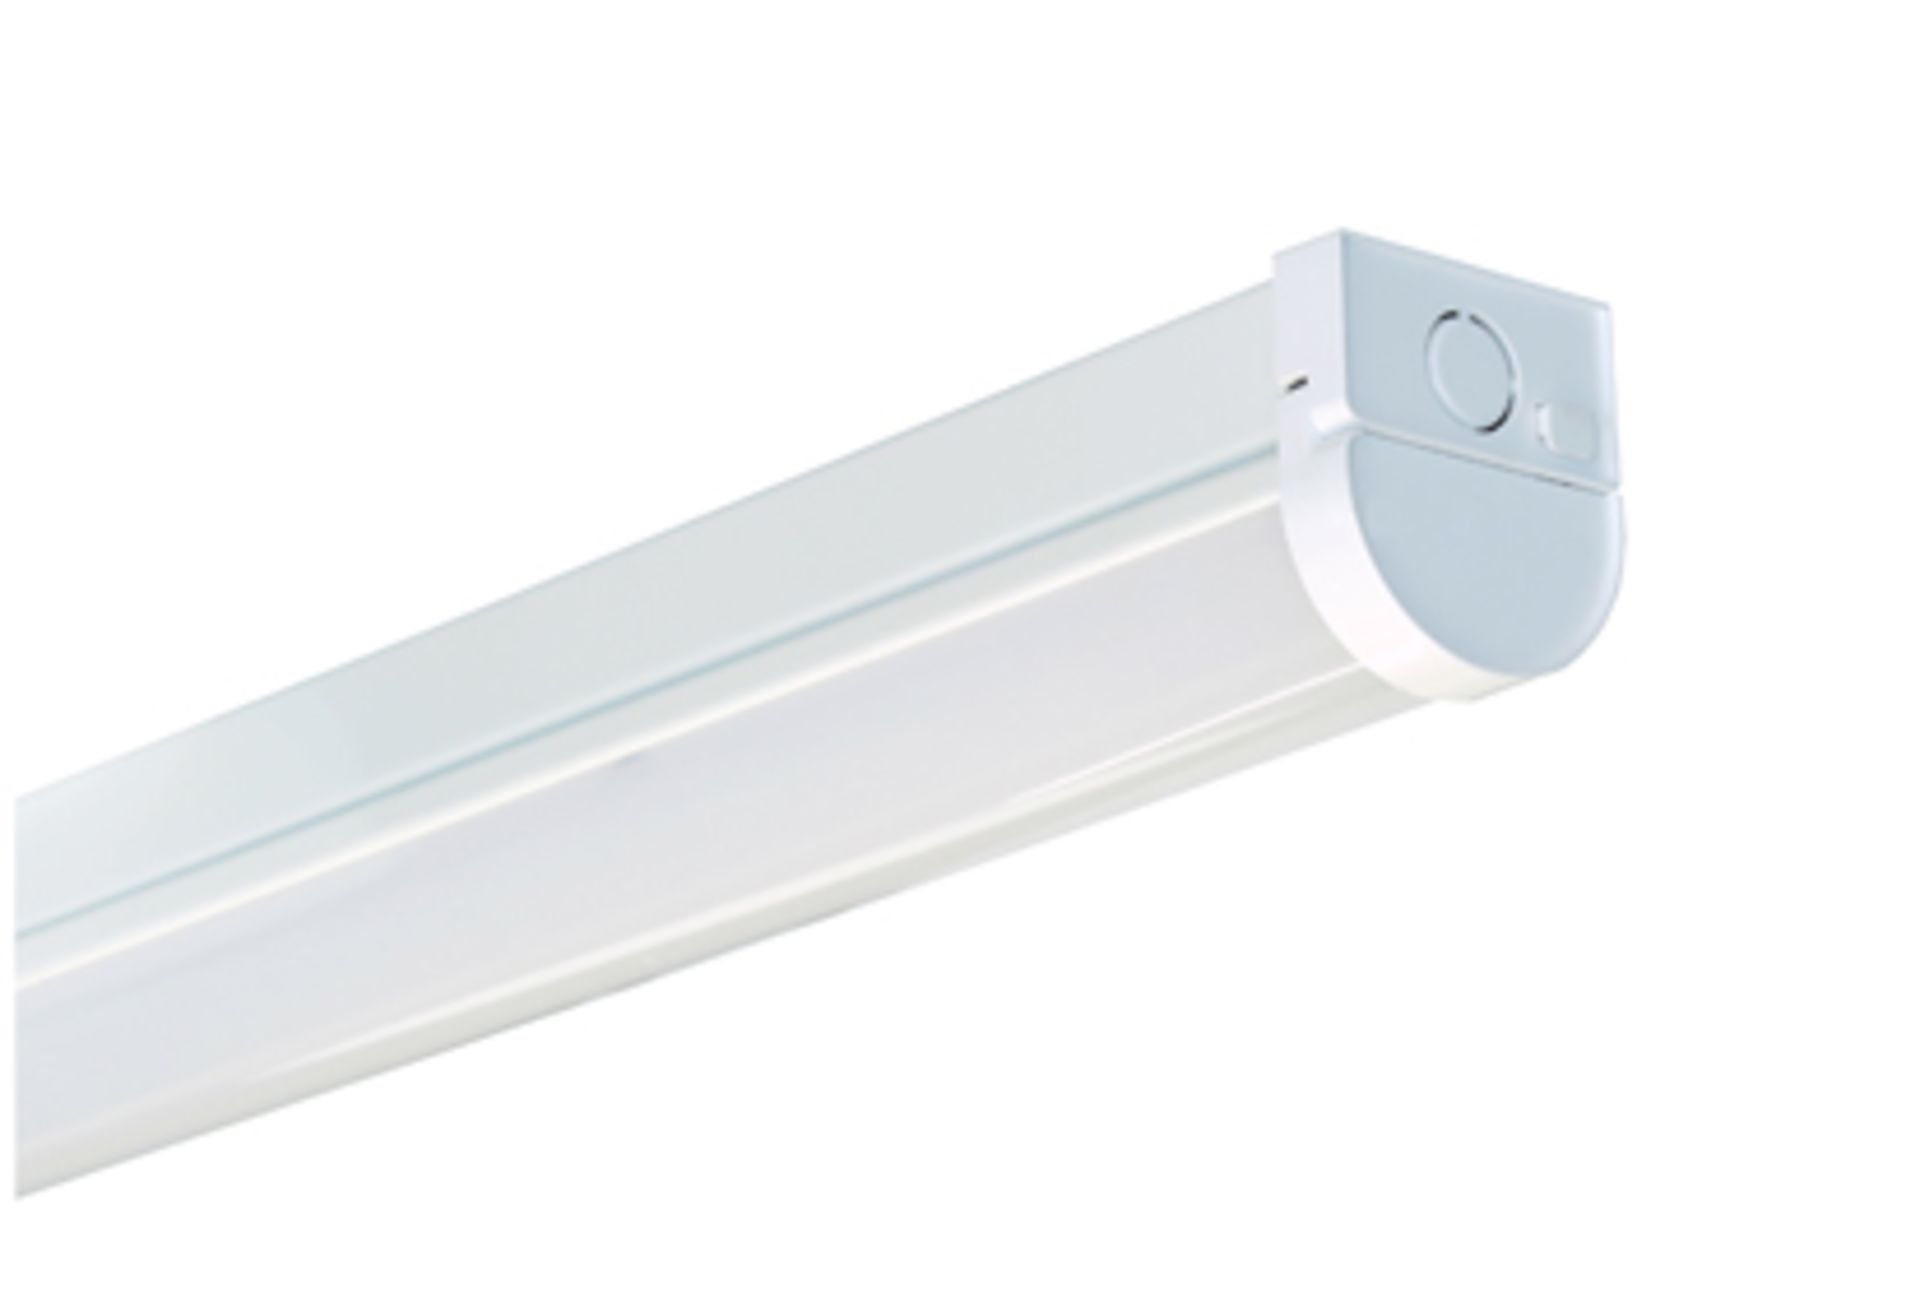 Approx 183 40w 4800LM LED Battens, product code T4BAT4800 - Image 4 of 5